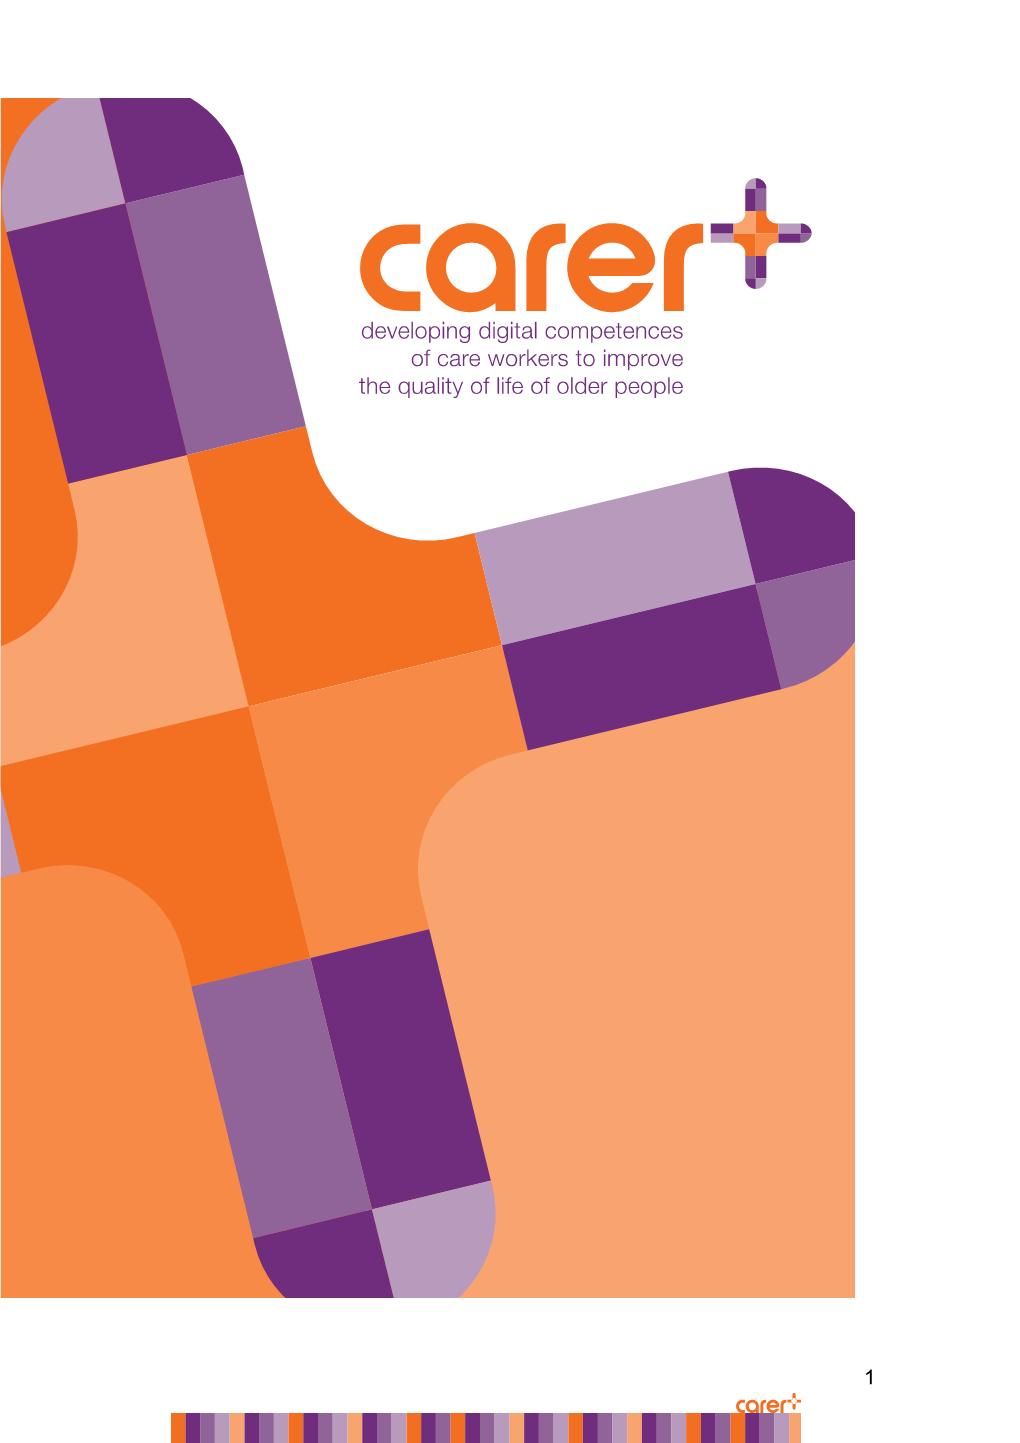 D5.6 Delivery of the Training Programme for Care Workers and Caregivers